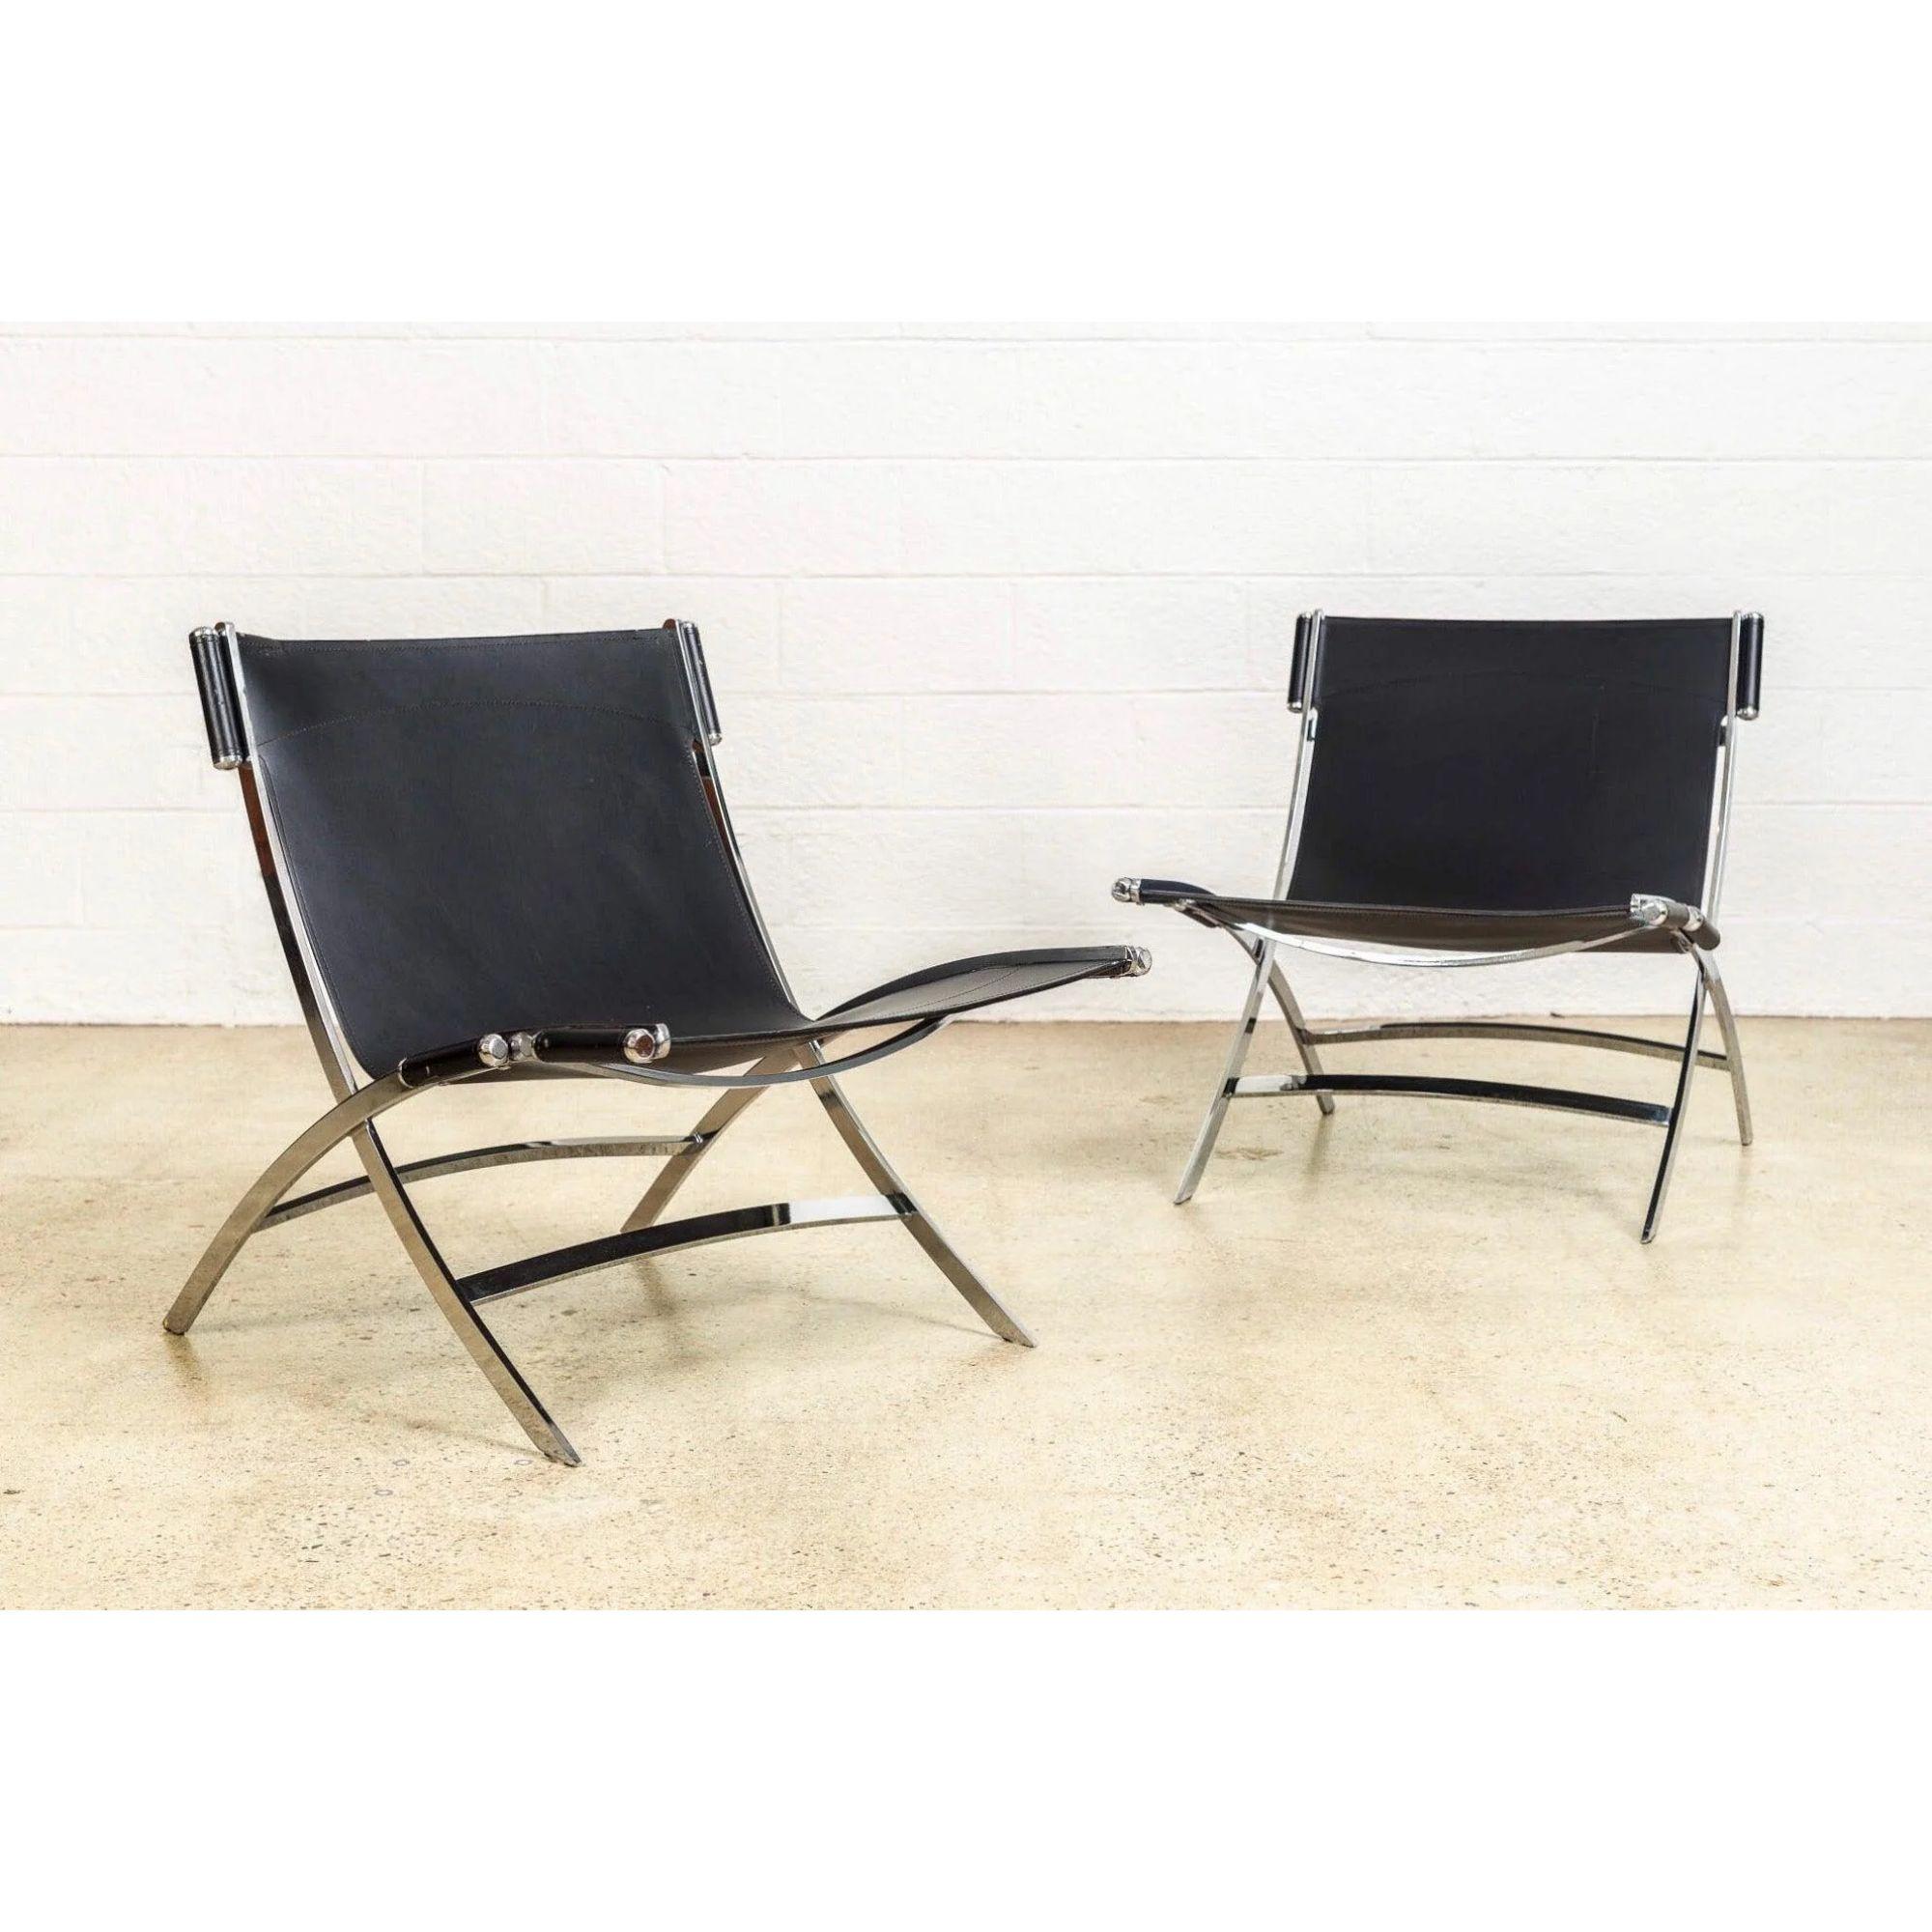 Steel Postmodern Chrome & Black Leather Timeless Lounge Chairs by Antonio Citterio For Sale